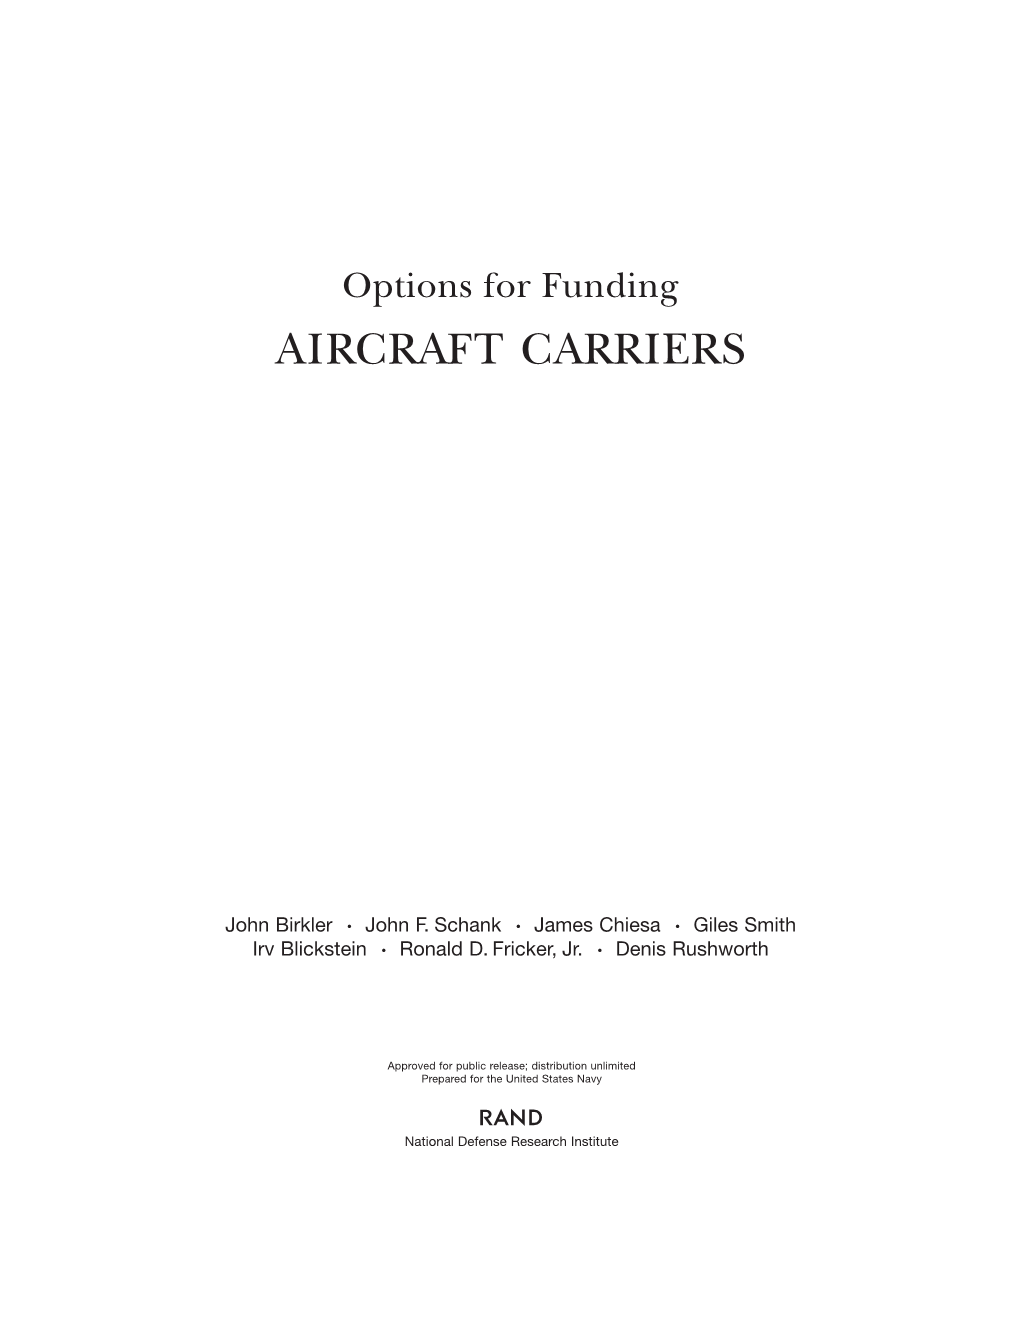 Options for Funding AIRCRAFT CARRIERS